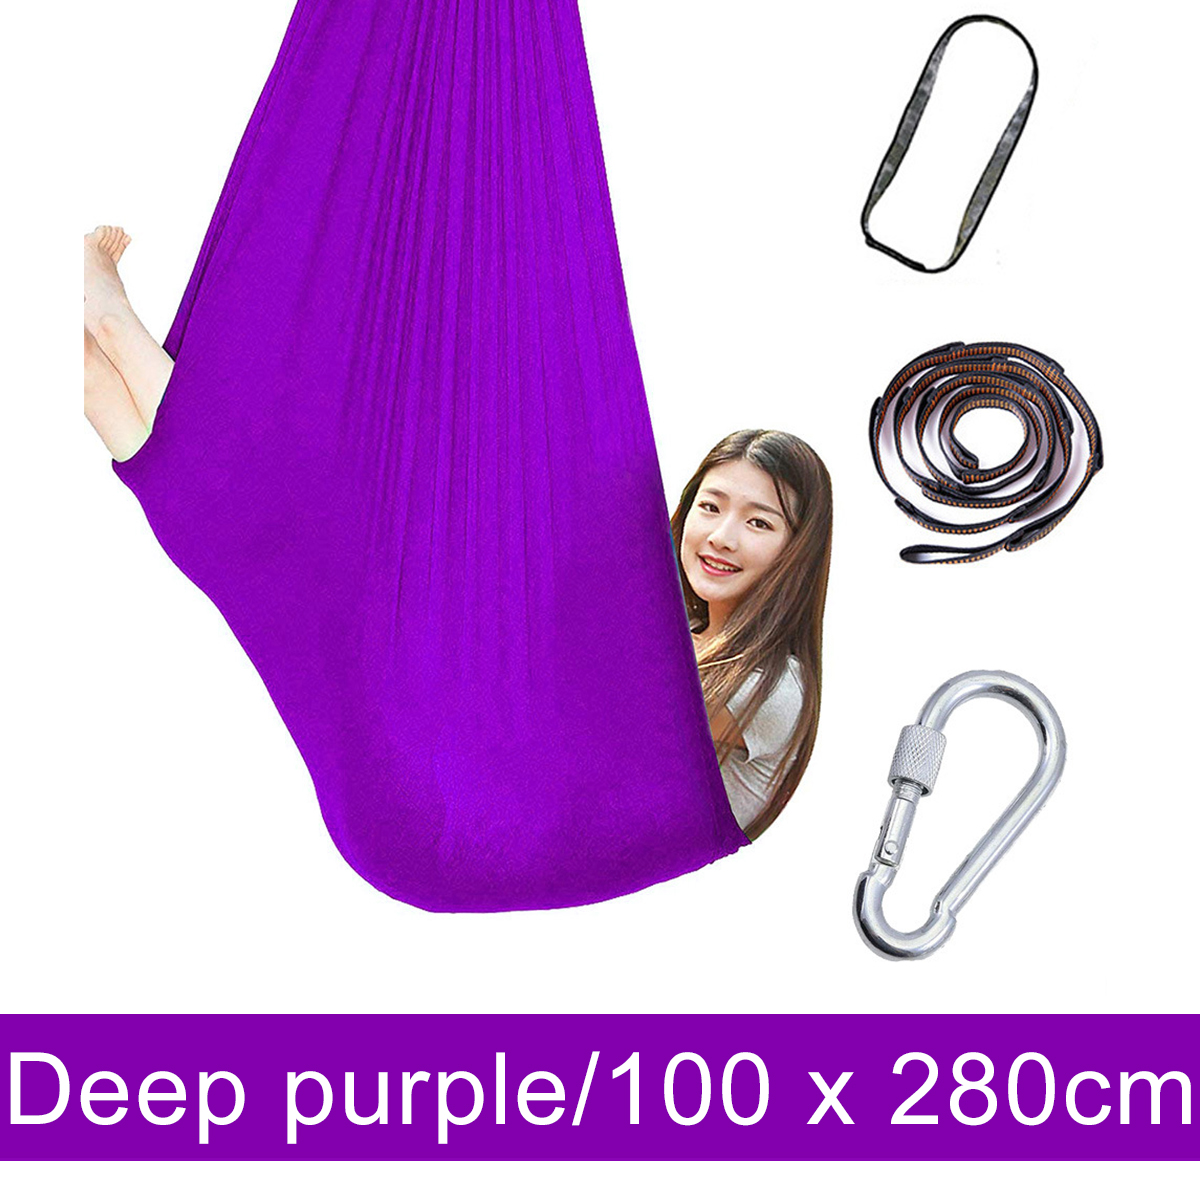 100cm x 280cm Kids Therapy Swing Cuddle Hanging Hammock with Autism ADHD Aspergers Sensory 6